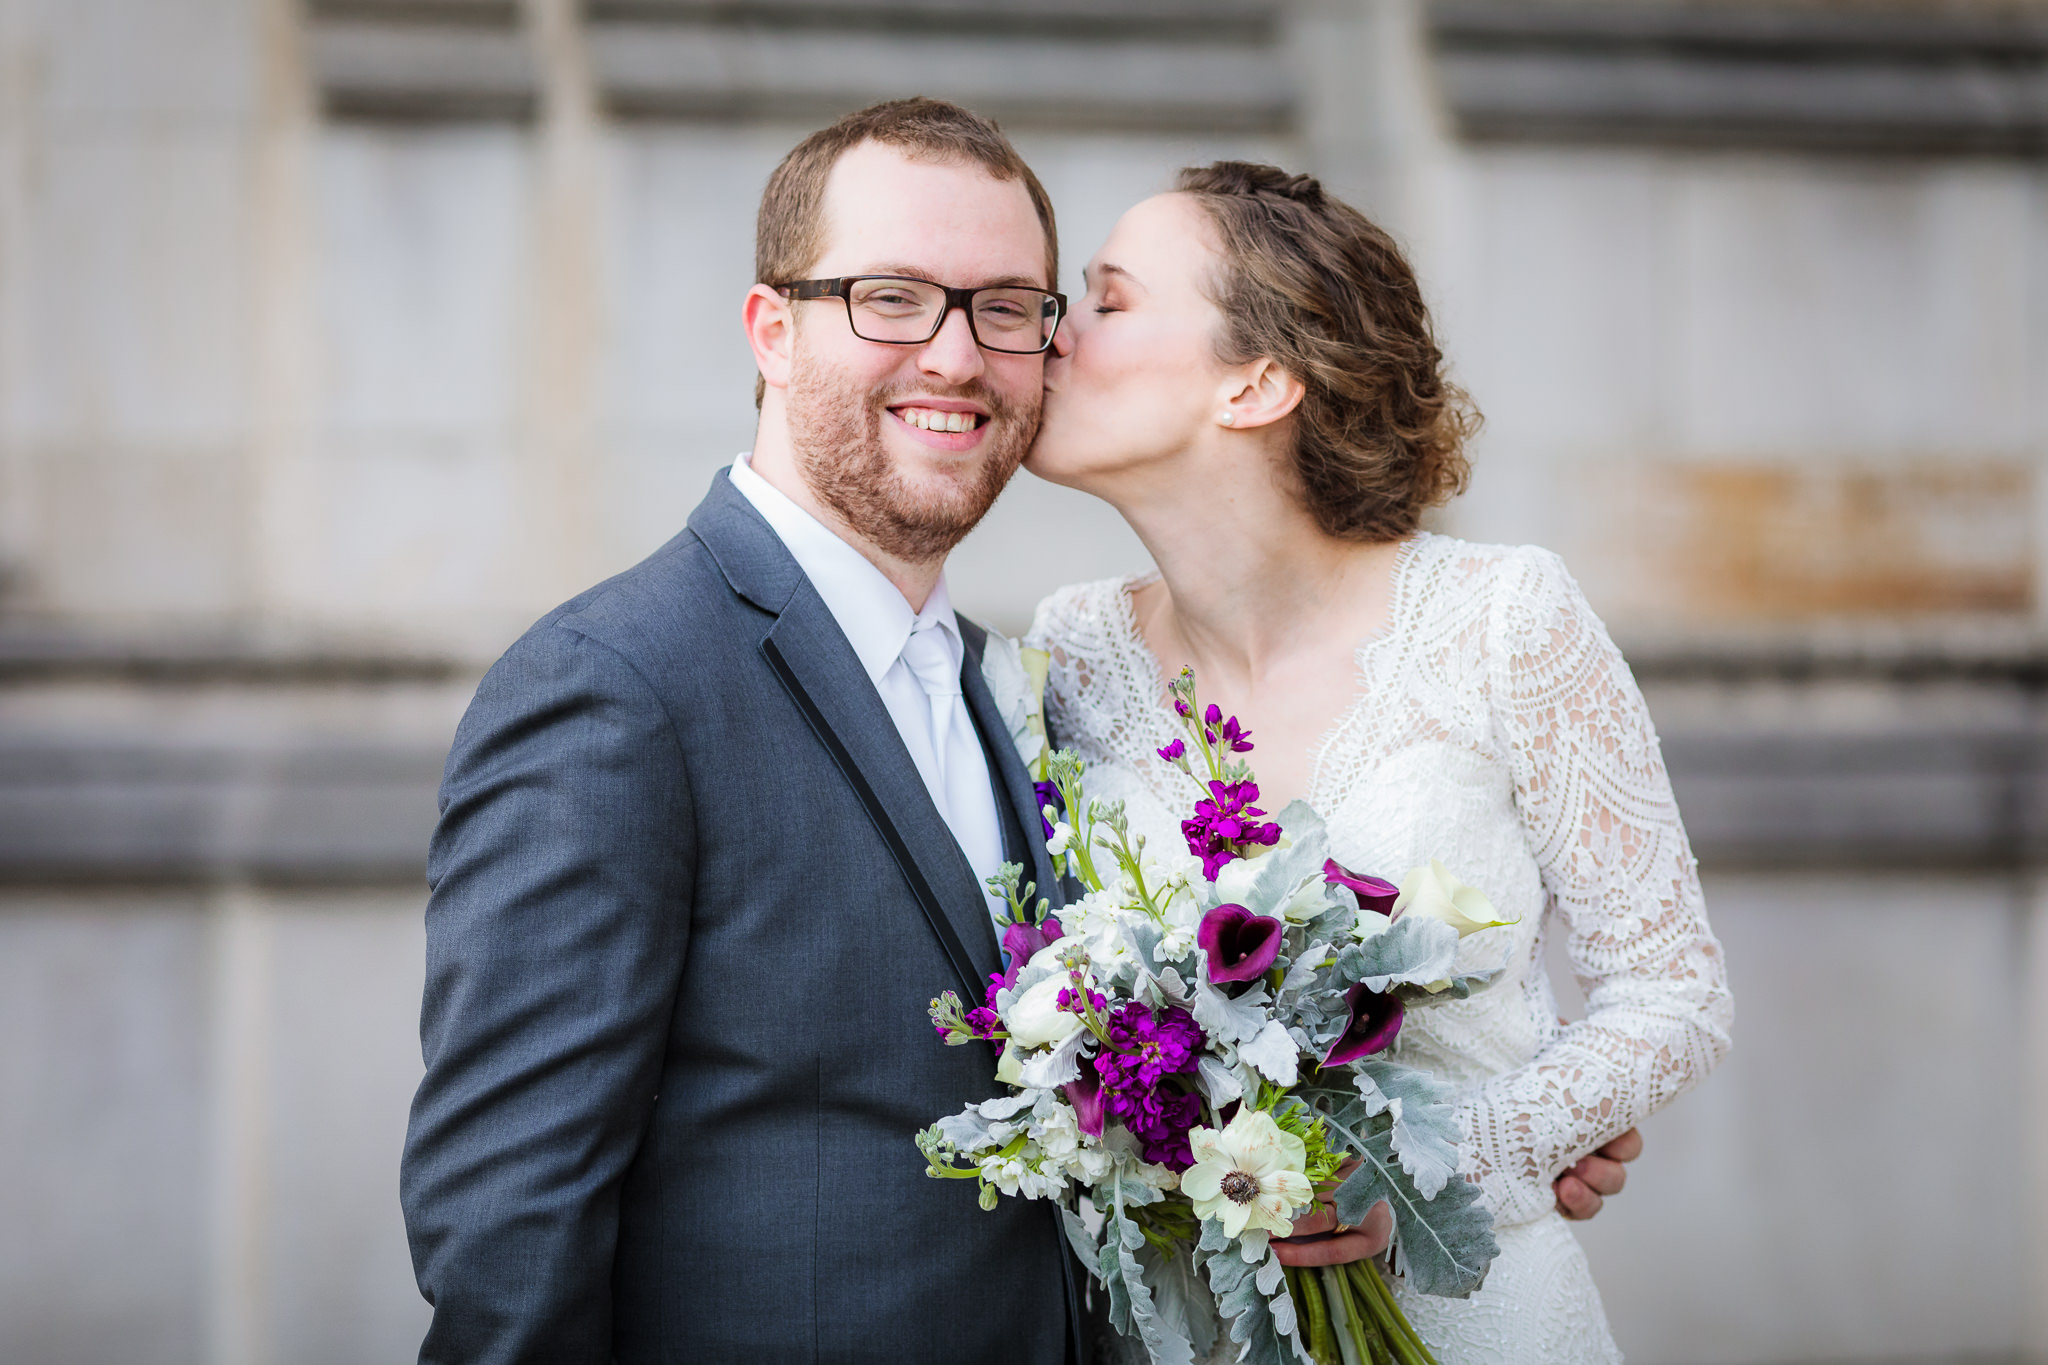 Bride kisses her groom on the cheek during portraits at the Cathedral of Learning